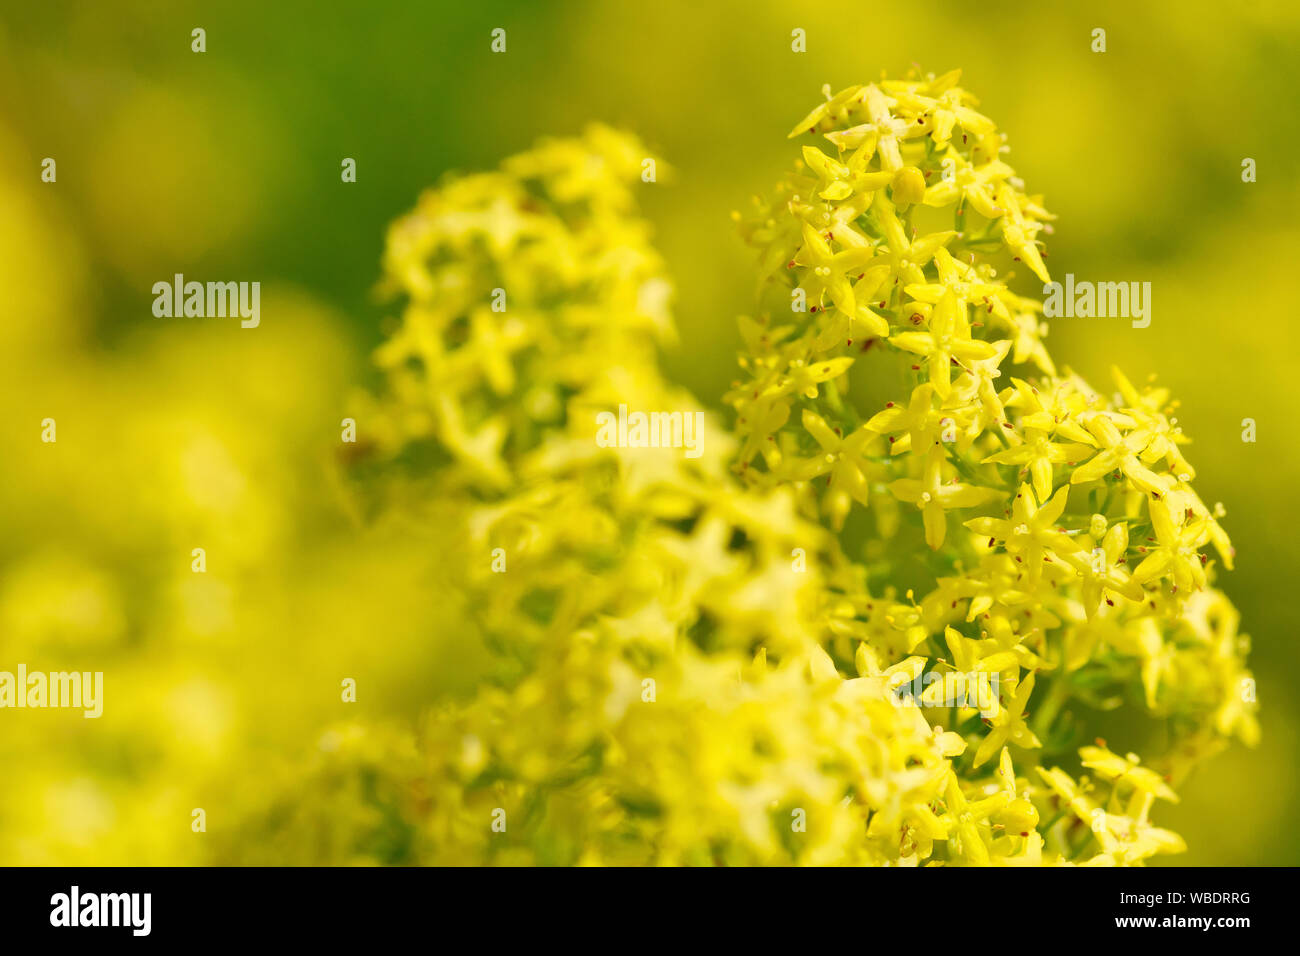 Lady's Bedstraw (galium verum), close up showing the tiny yellow flowers of the plant. Stock Photo